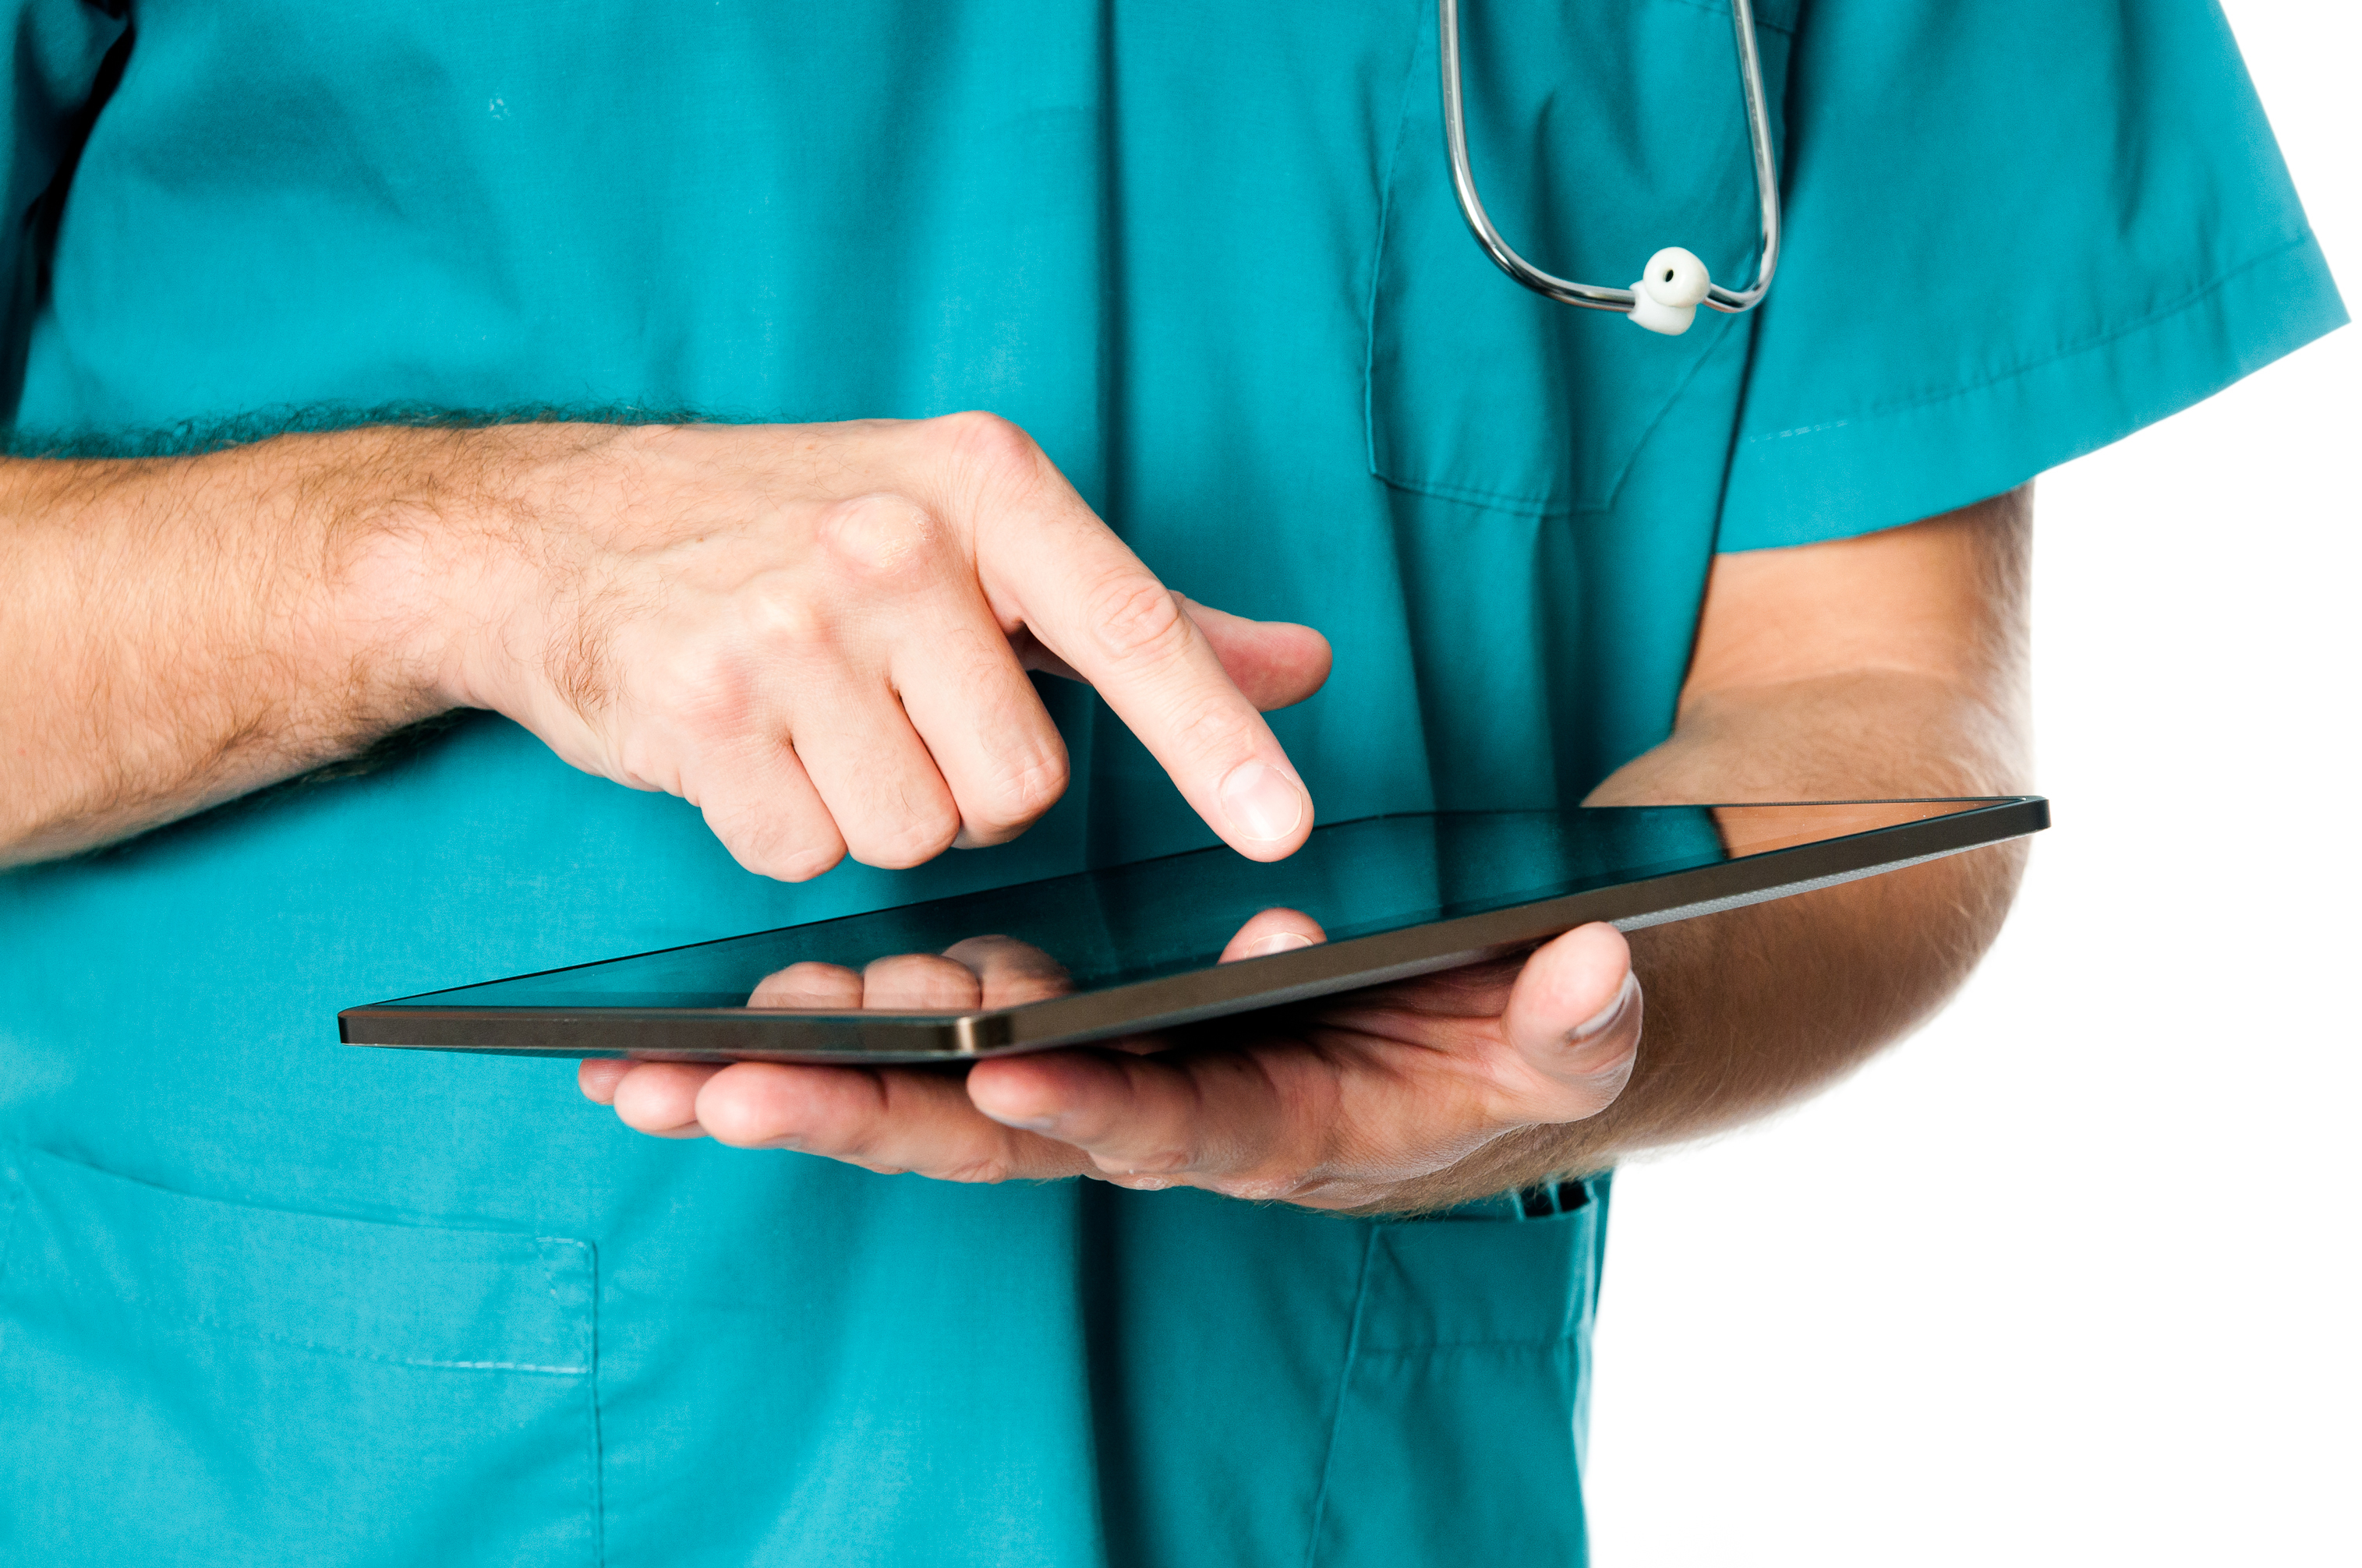 tablet-use-rising-with-healthcare-professionals